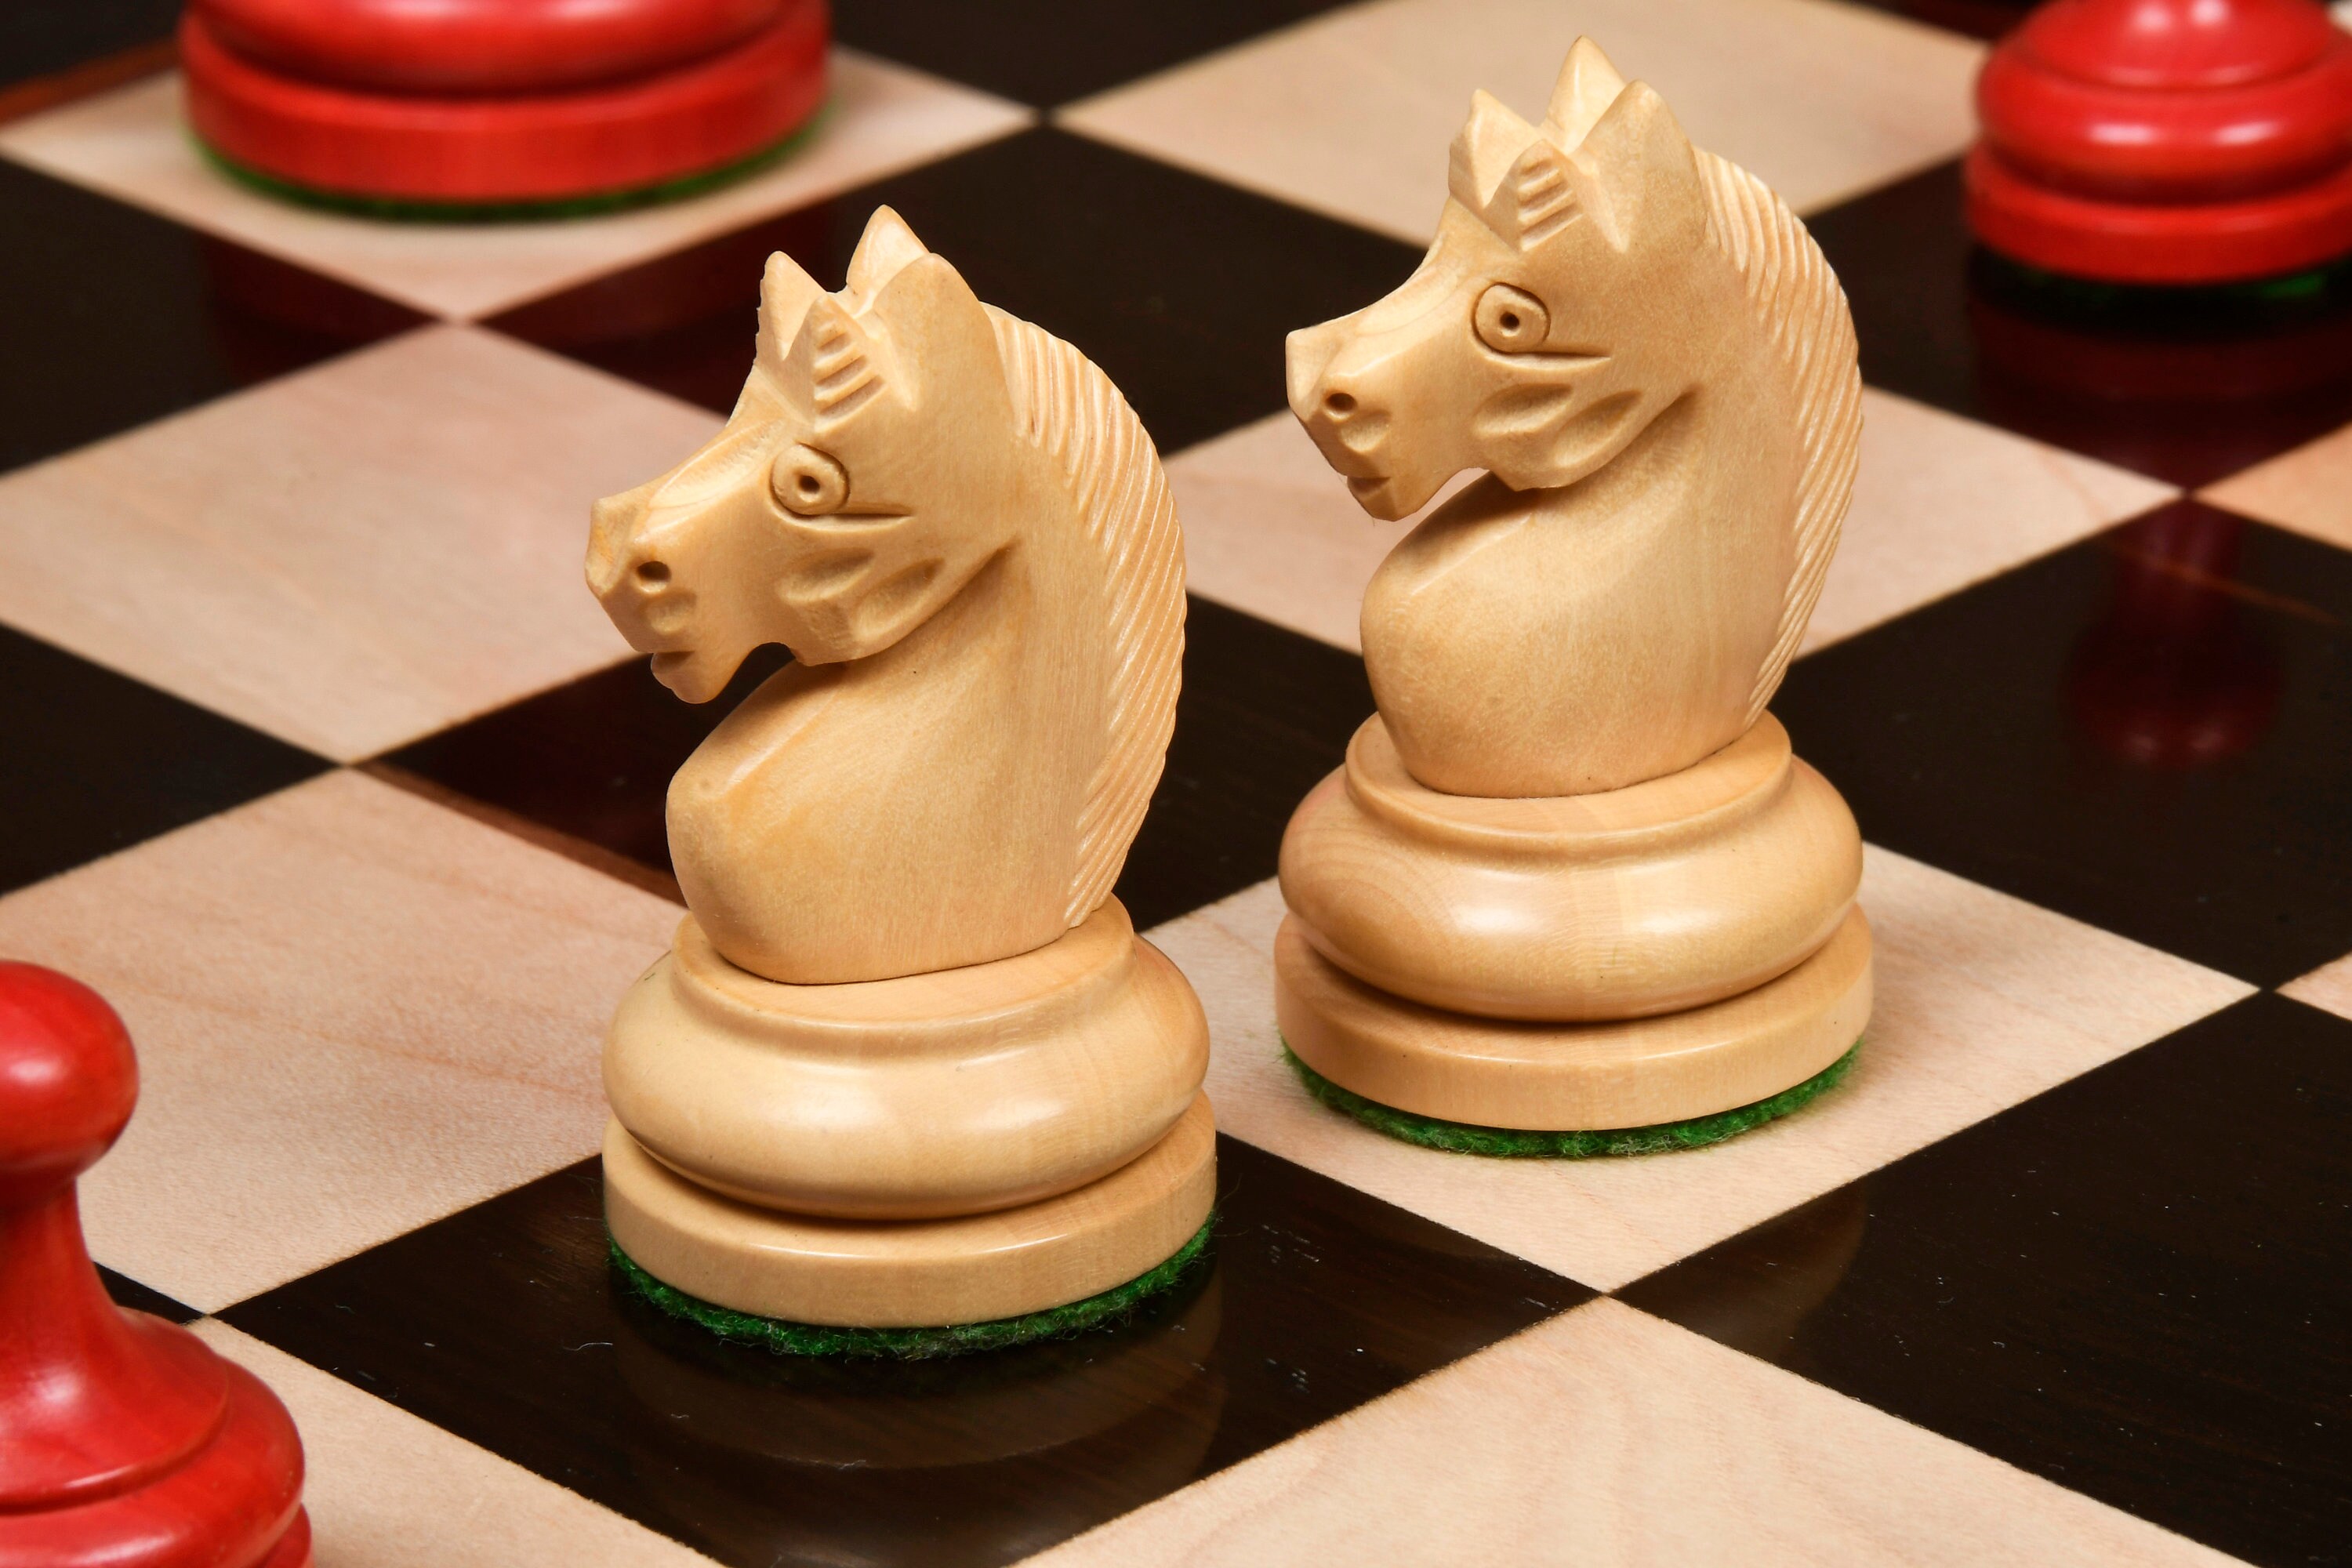 Combo of Reproduced Vintage 1930 German Knubbel Analysis Chess Pieces in  Stained Crimson and Boxwood - 3 King with Chess Board